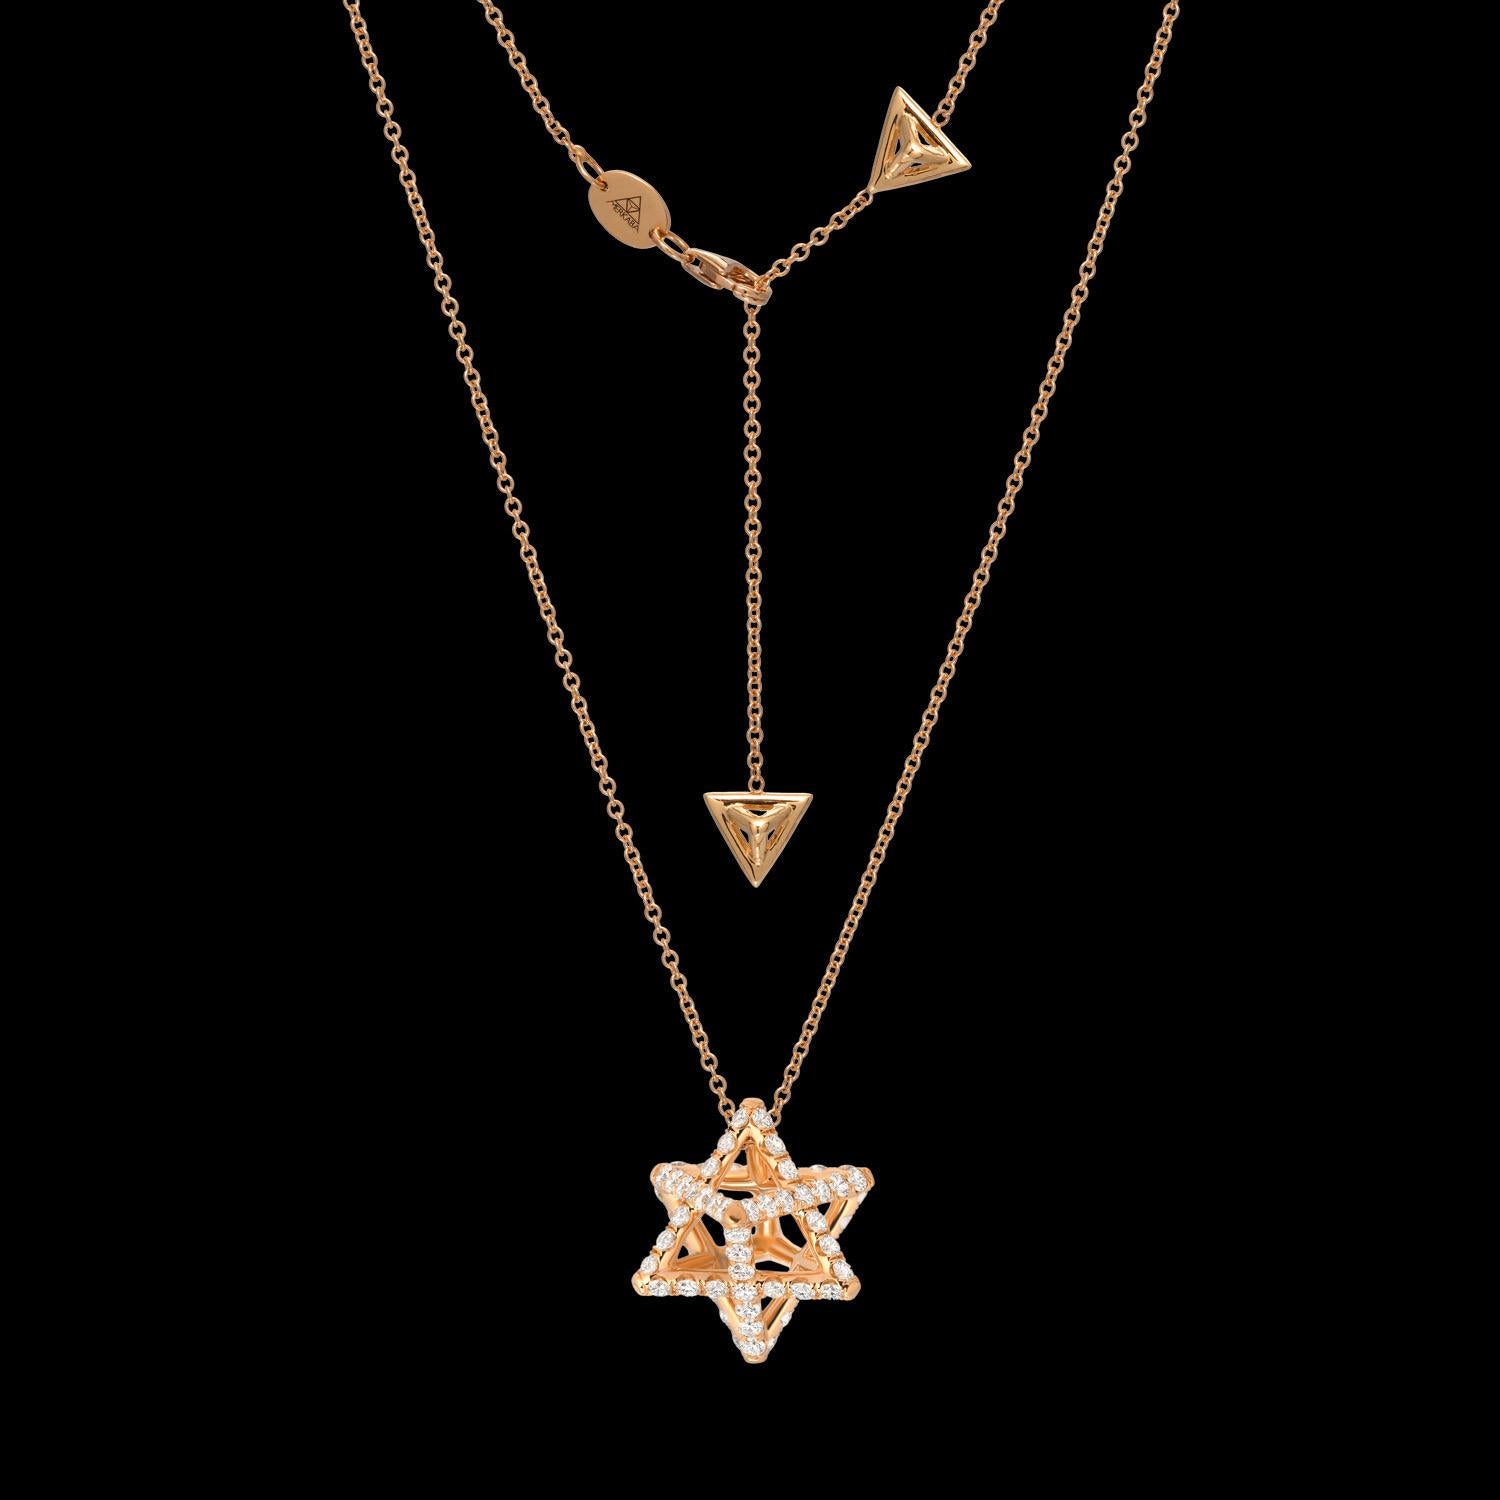 Merkaba Star, 18K rose gold pendant necklace, featuring a total of approximately 1.12 carats round brilliant collection diamonds. This heirloom-quality, sacred geometric jewelry piece suspends elegantly at the chest, measuring 0.68 inches, a